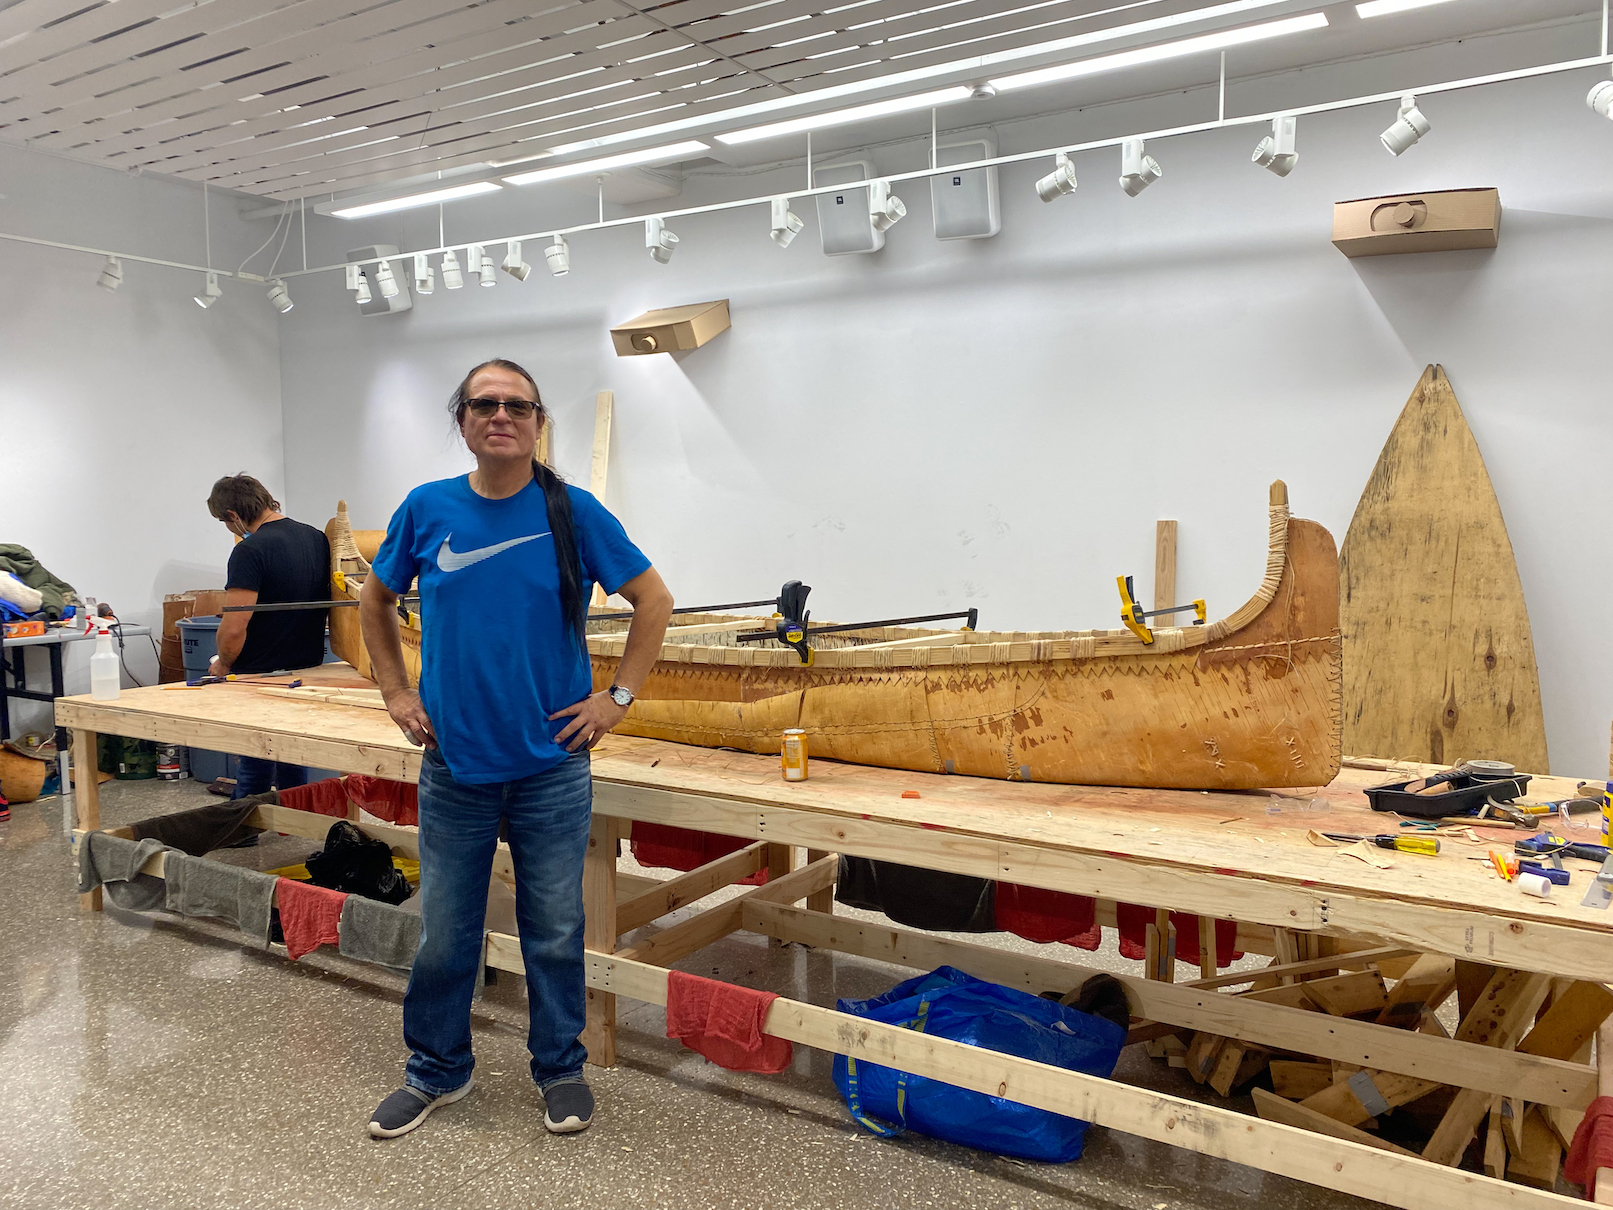 Valliere stands in front of the unfinished canoe.